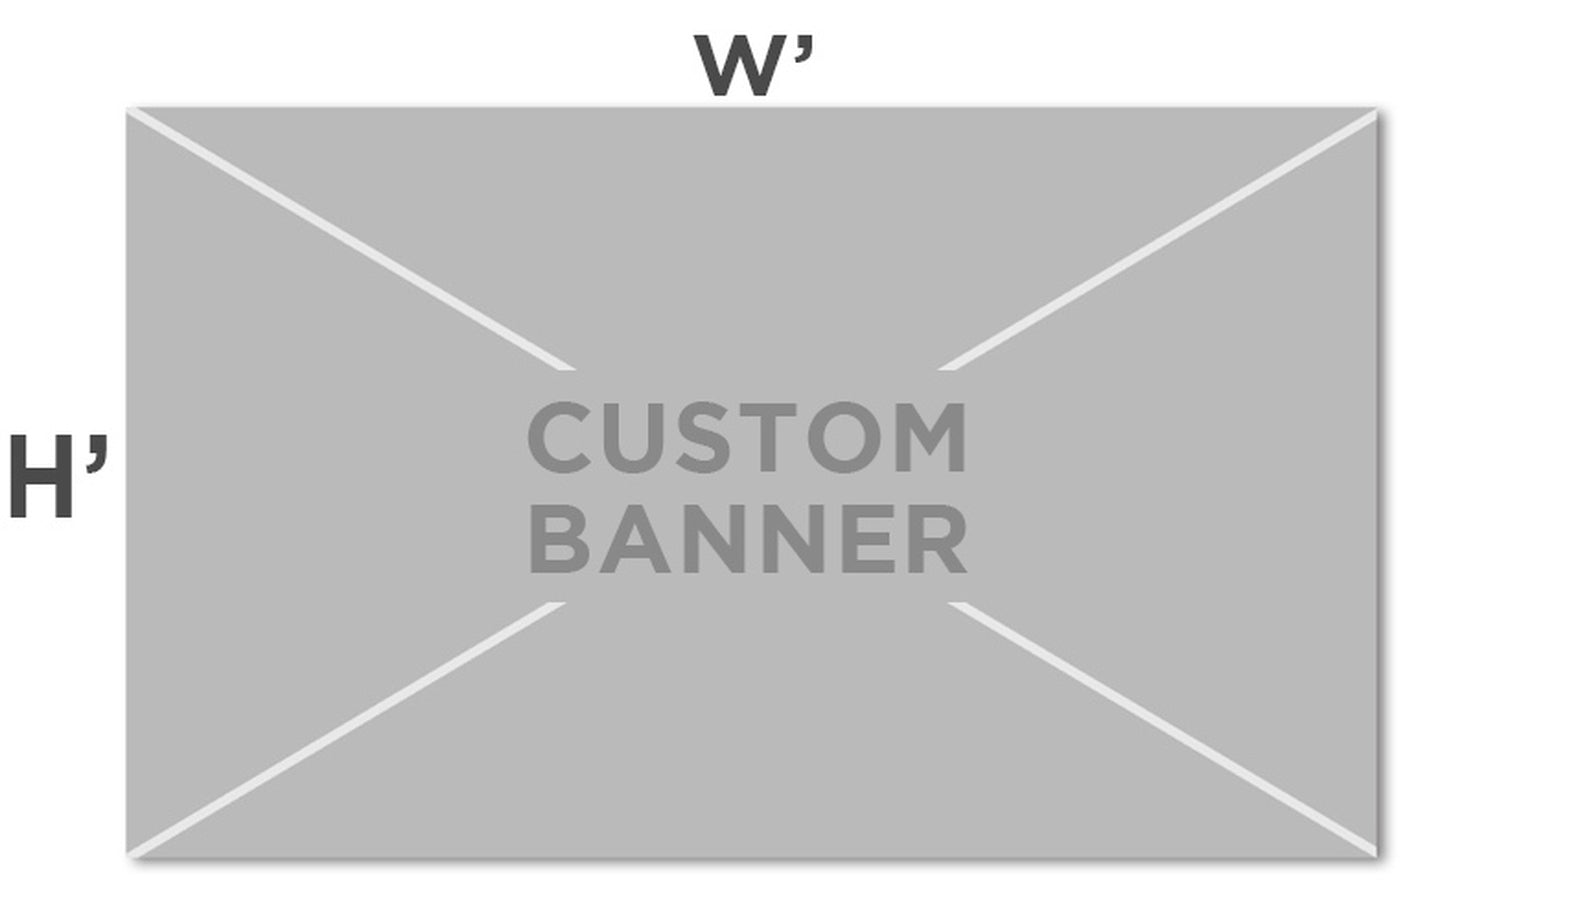 Custom vinyl banner for small business owners and organizations. For personal or business use.